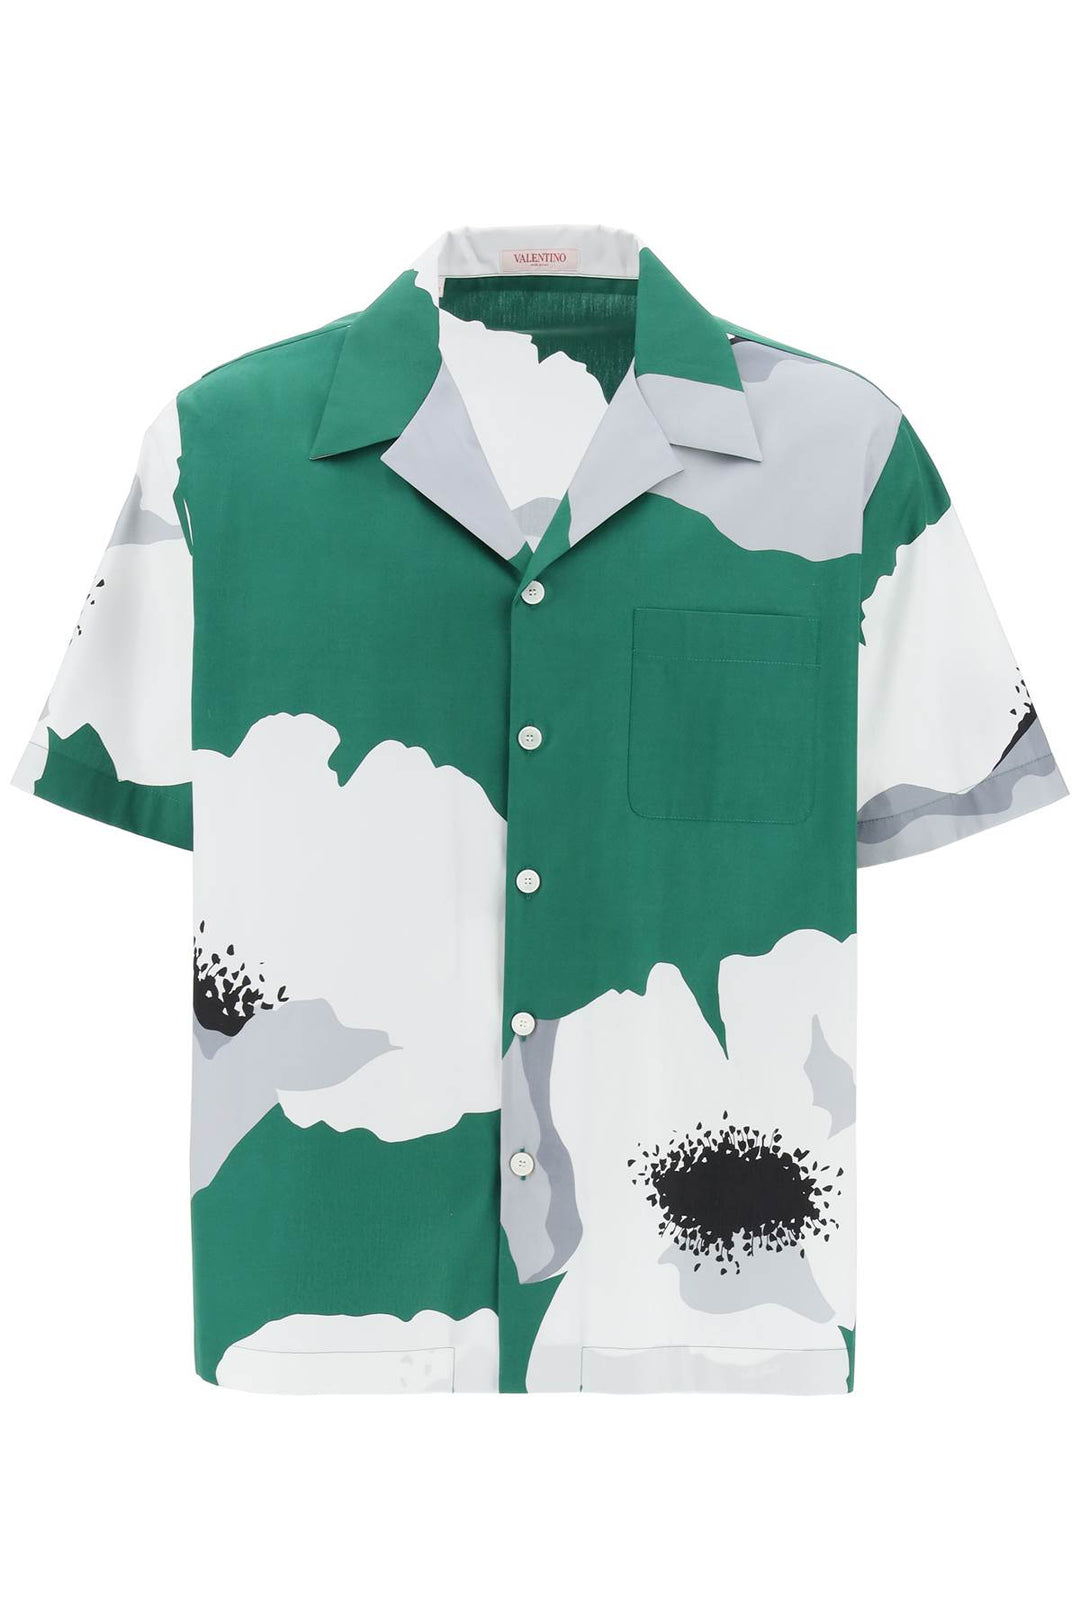 Valentino Garavani Replace With Double Quoteflower Portrait Print Poplin Bowling Shirtreplace With Double Quote   Verde